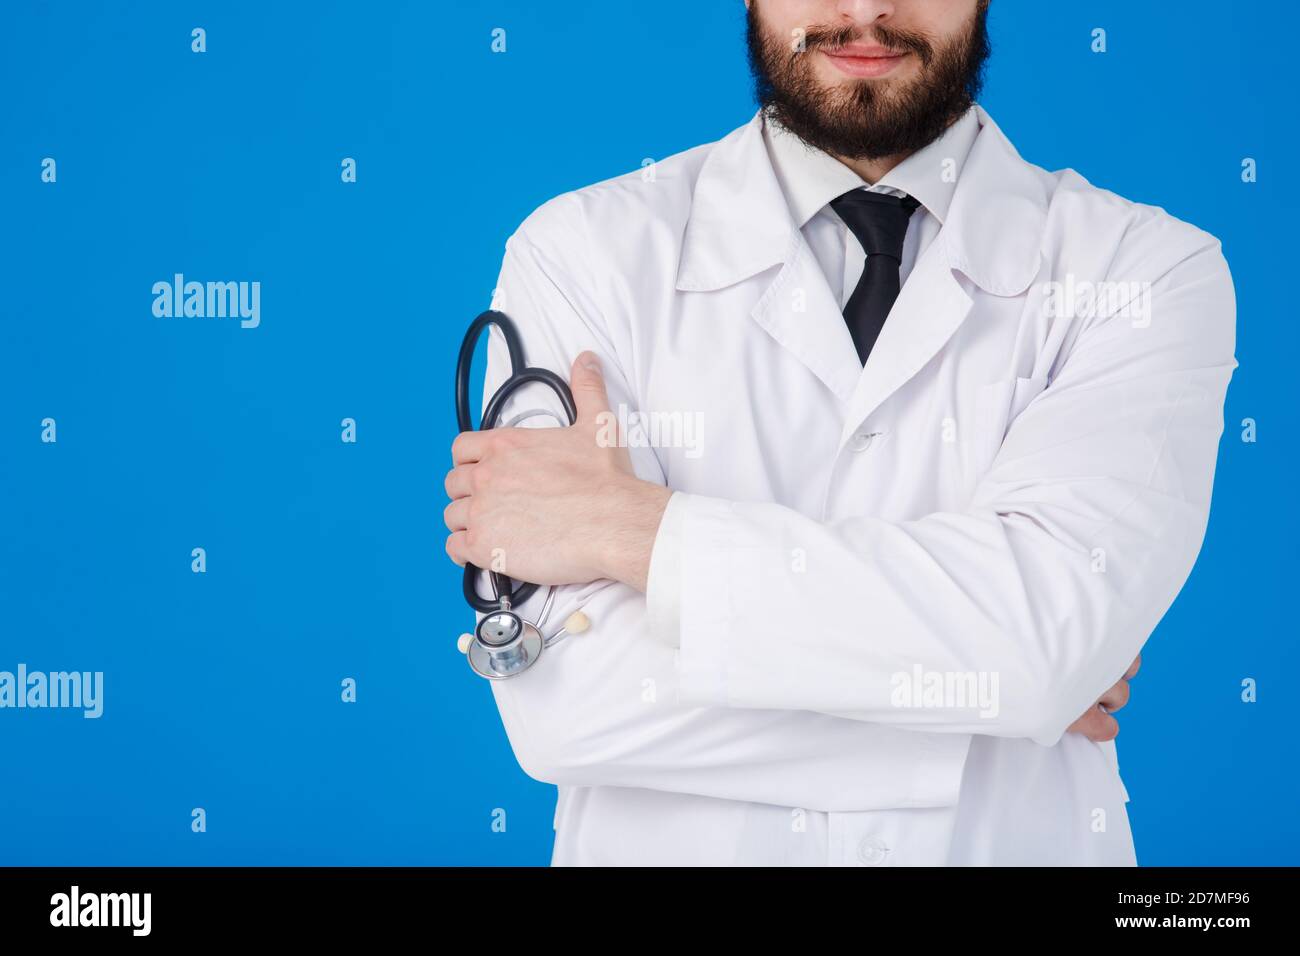 doctor doctoring clinic medicine cardiologist patient health background concept close up Stock Photo